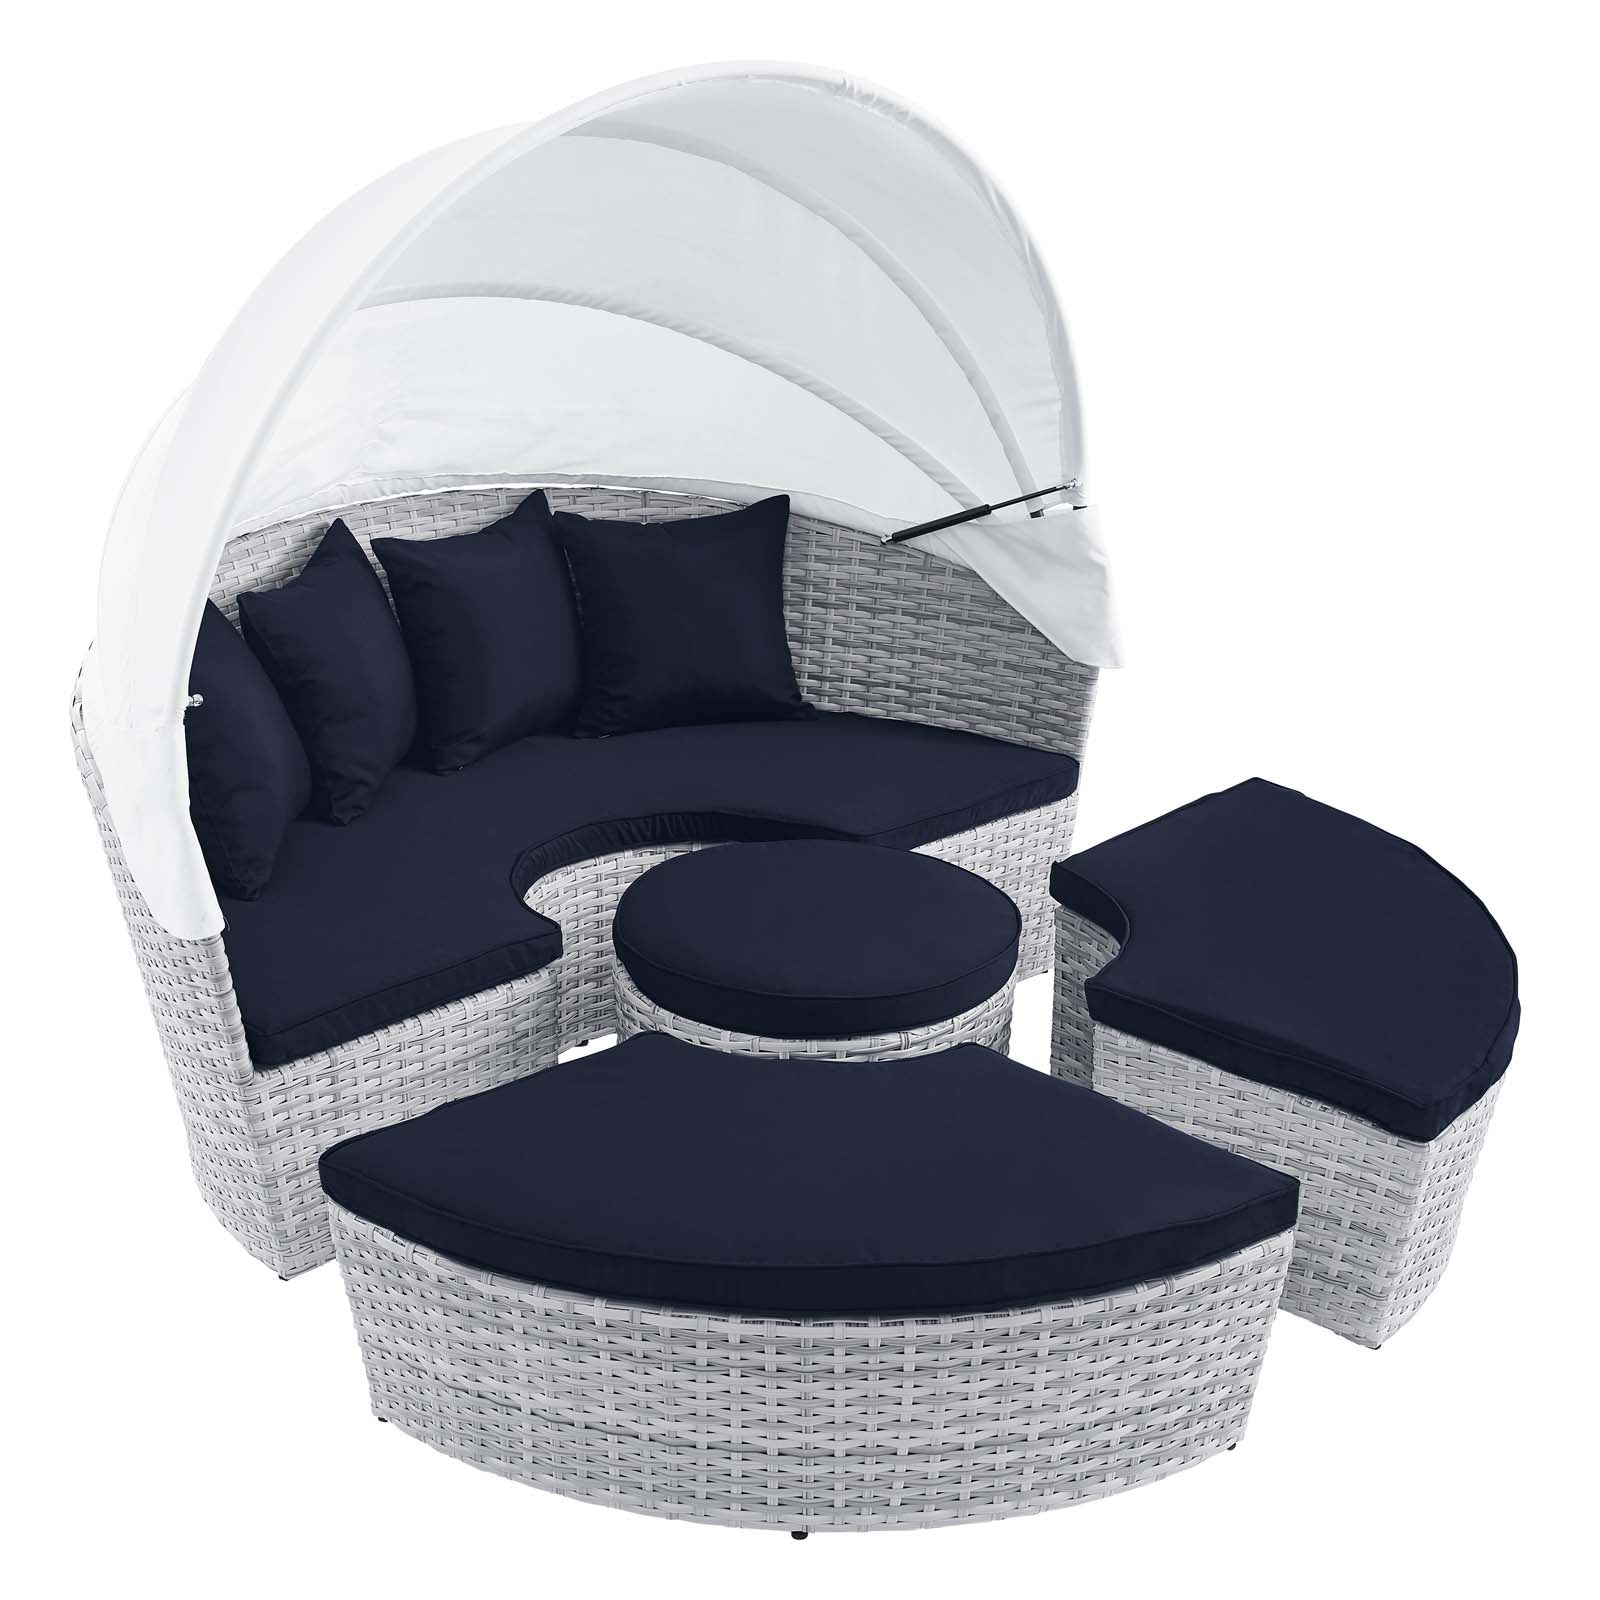 Modway Patio Daybeds - Scottsdale Canopy Outdoor Patio Daybed Light Gray Navy